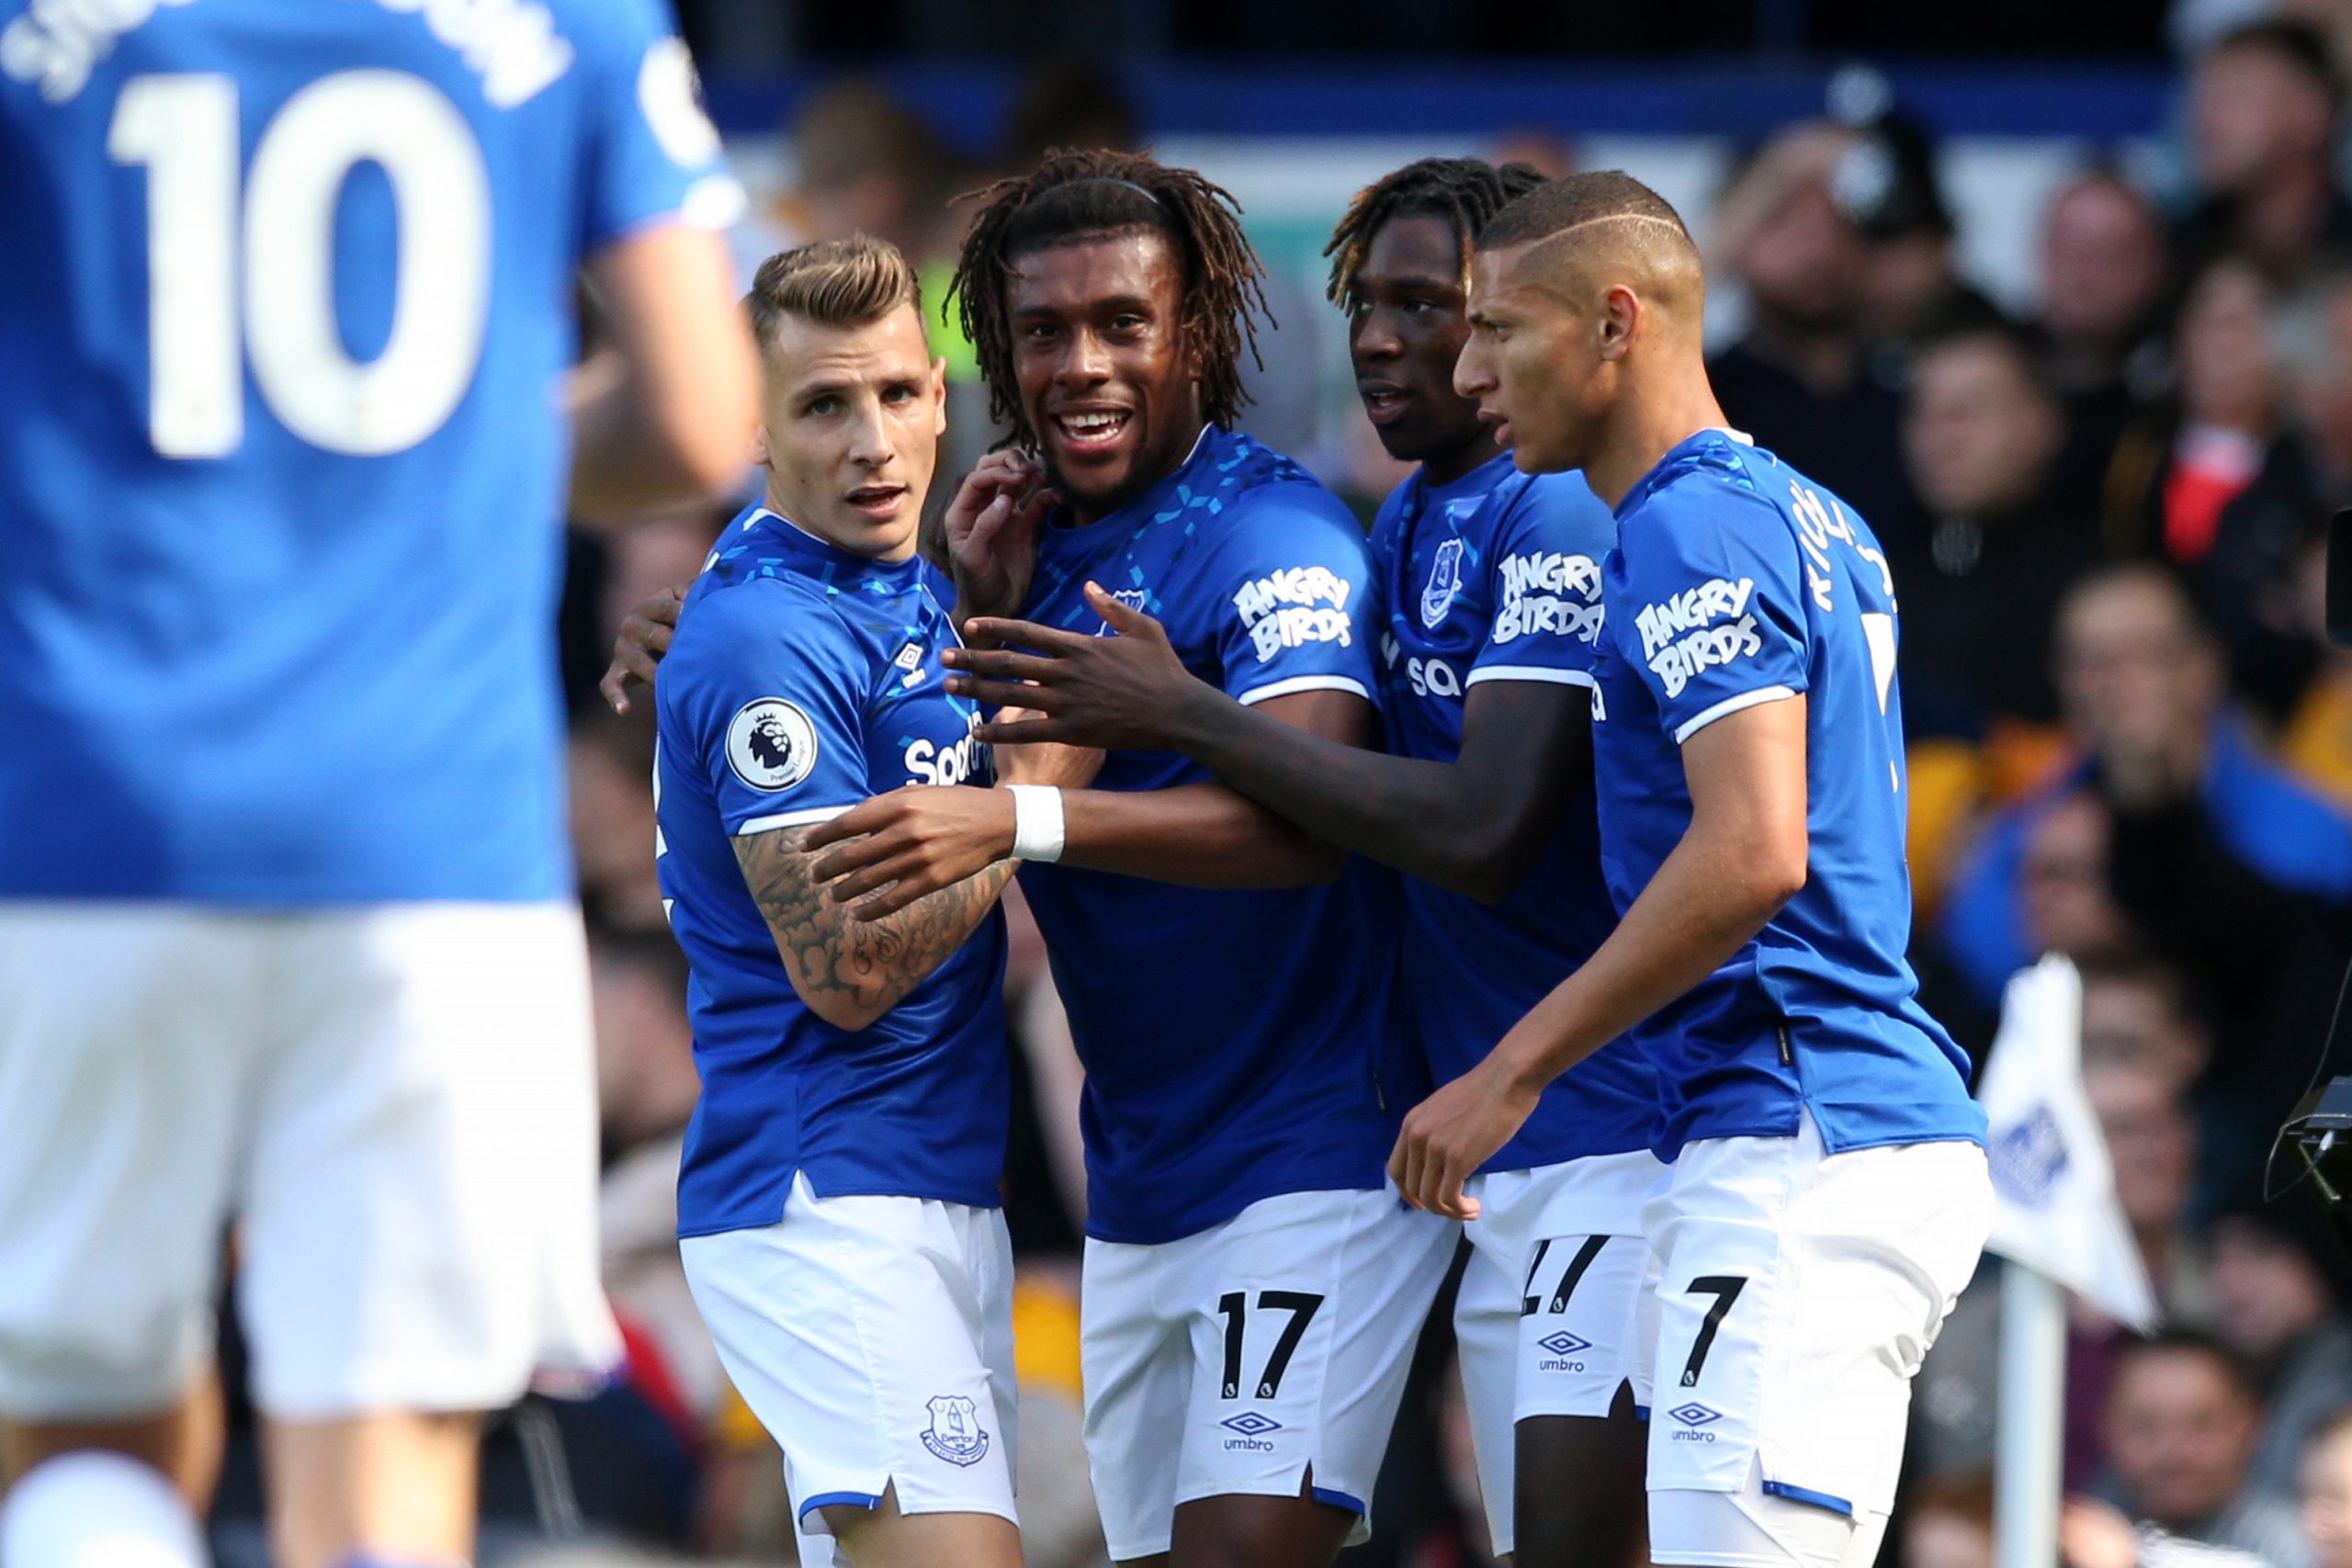 LIVERPOOL, ENGLAND - SEPTEMBER 01: Alex Iwobi of Everton celebrates with teammates after scoring his team's second goal during the Premier League match between Everton FC and Wolverhampton Wanderers at Goodison Park on September 01, 2019 in Liverpool, United Kingdom. (Photo by Jan Kruger/Getty Images)